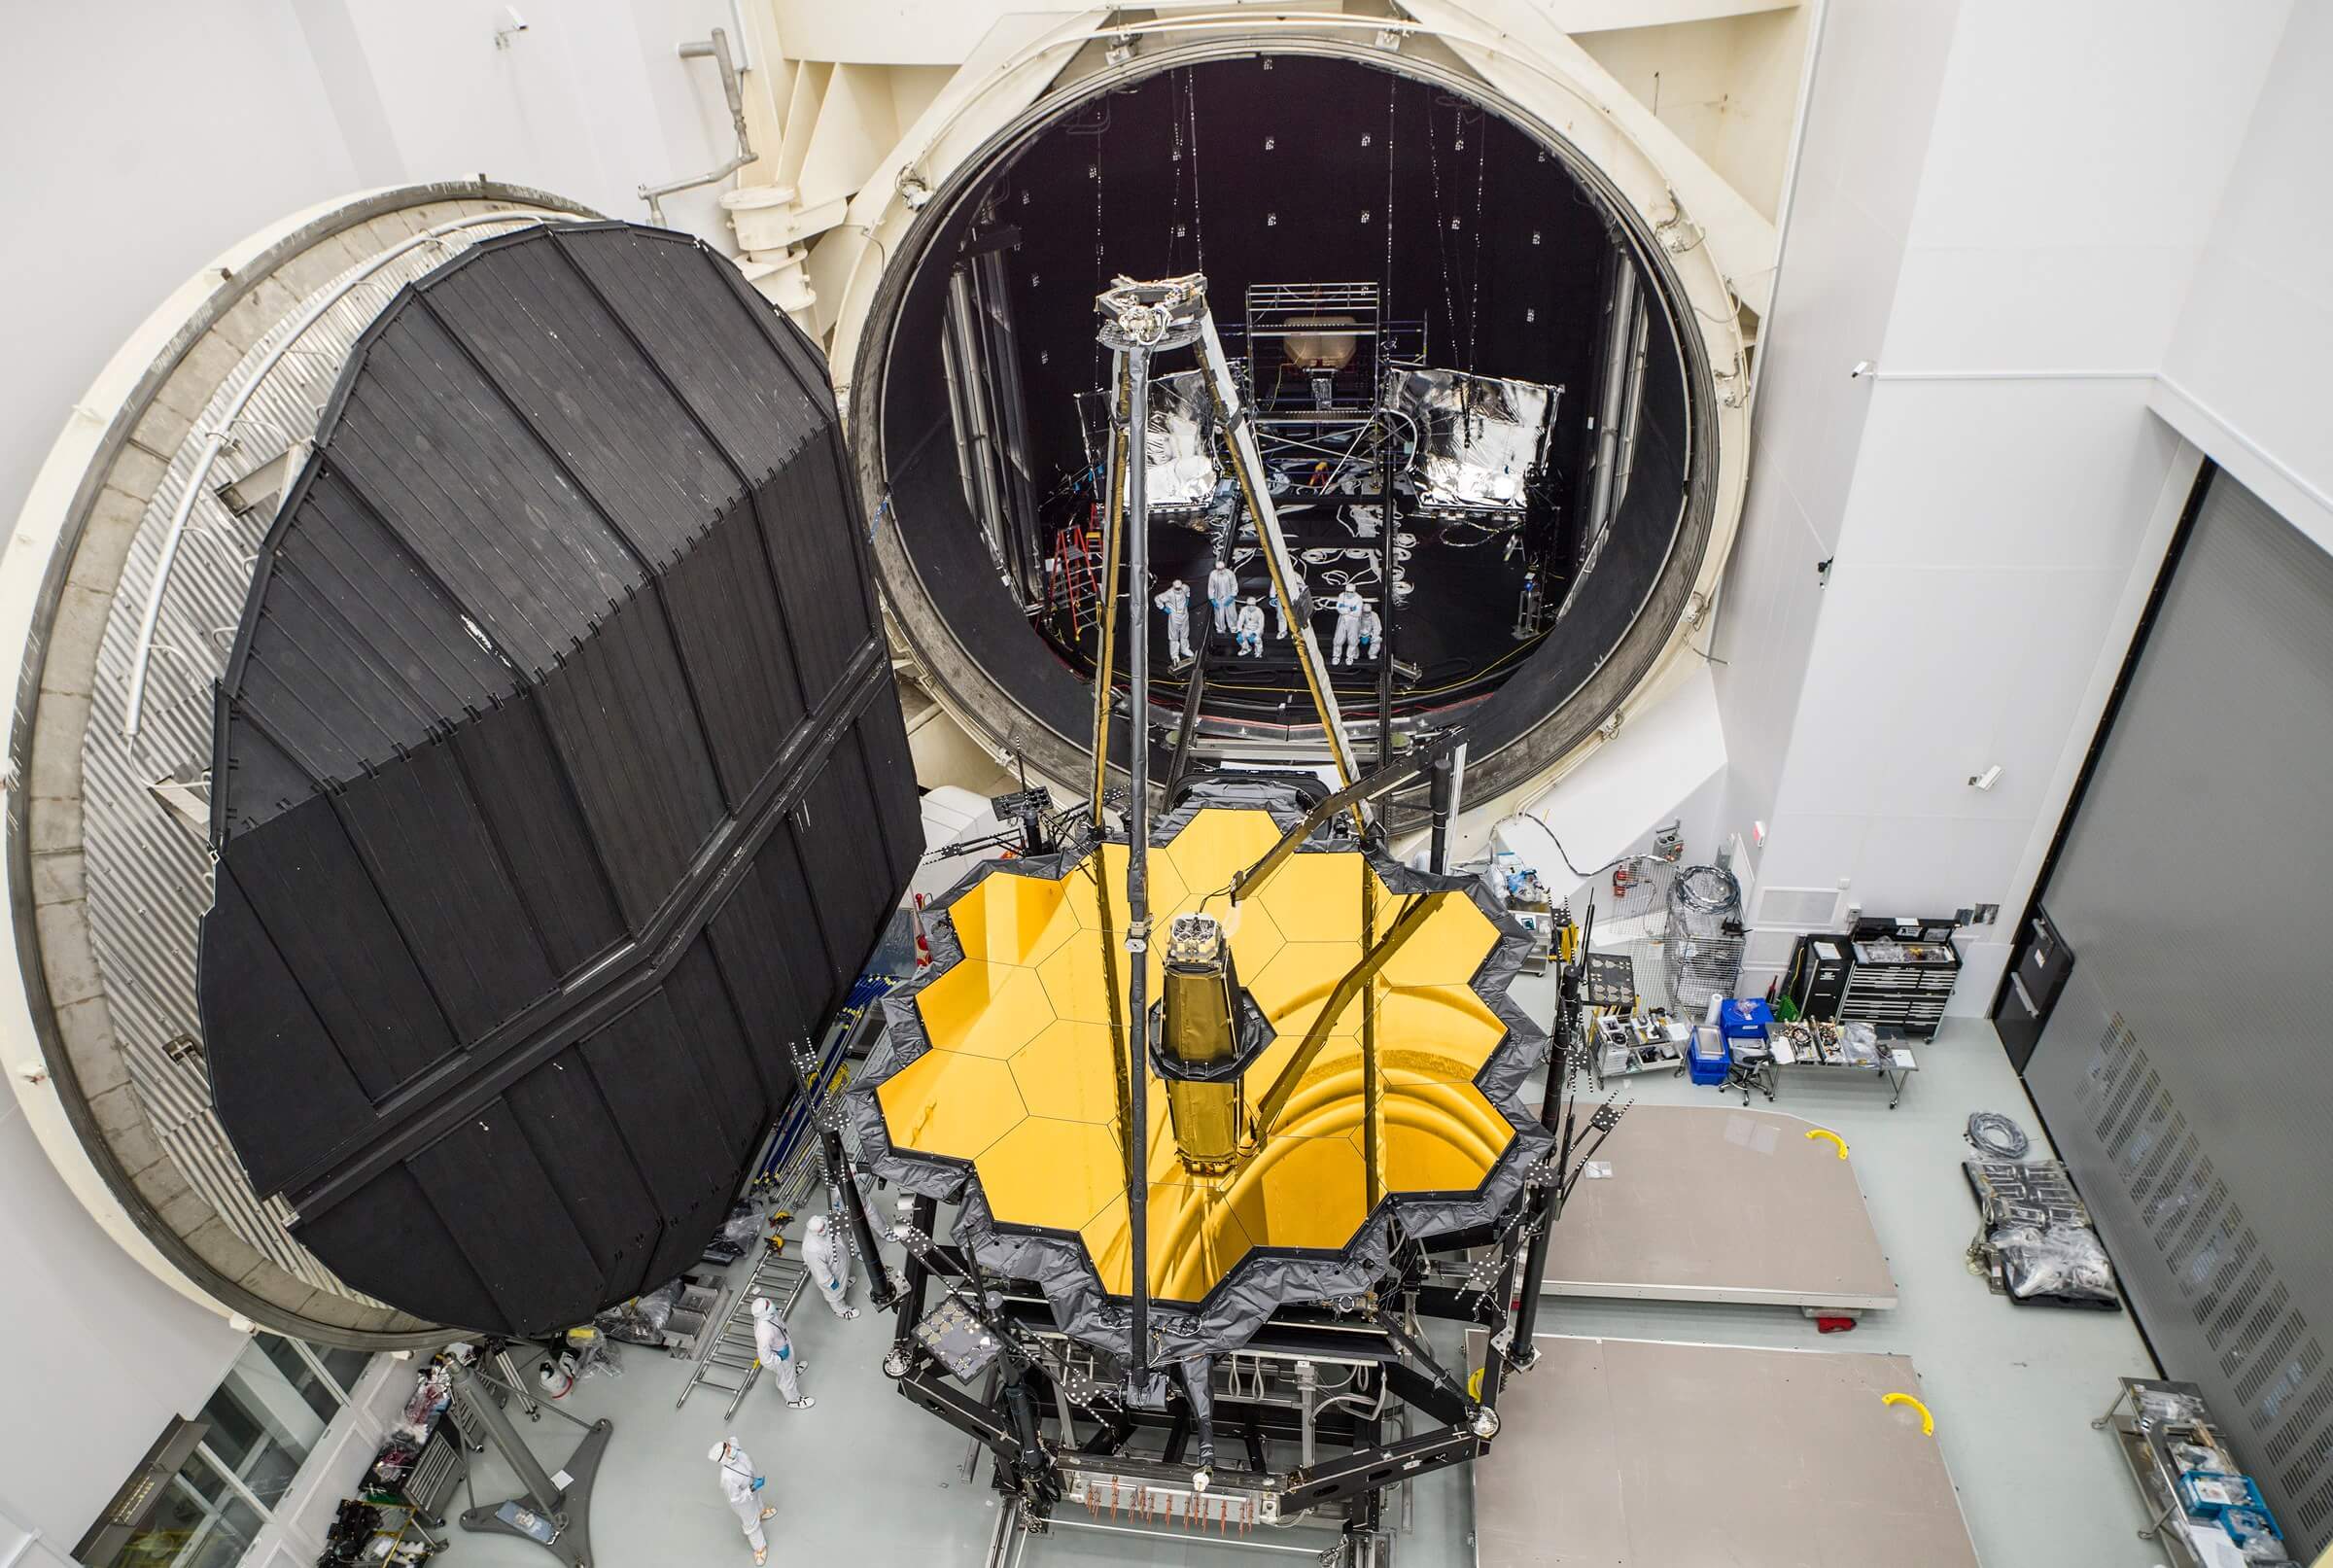 NASA's James Webb Space Telescope will likely miss its rescheduled launch date of March 2021